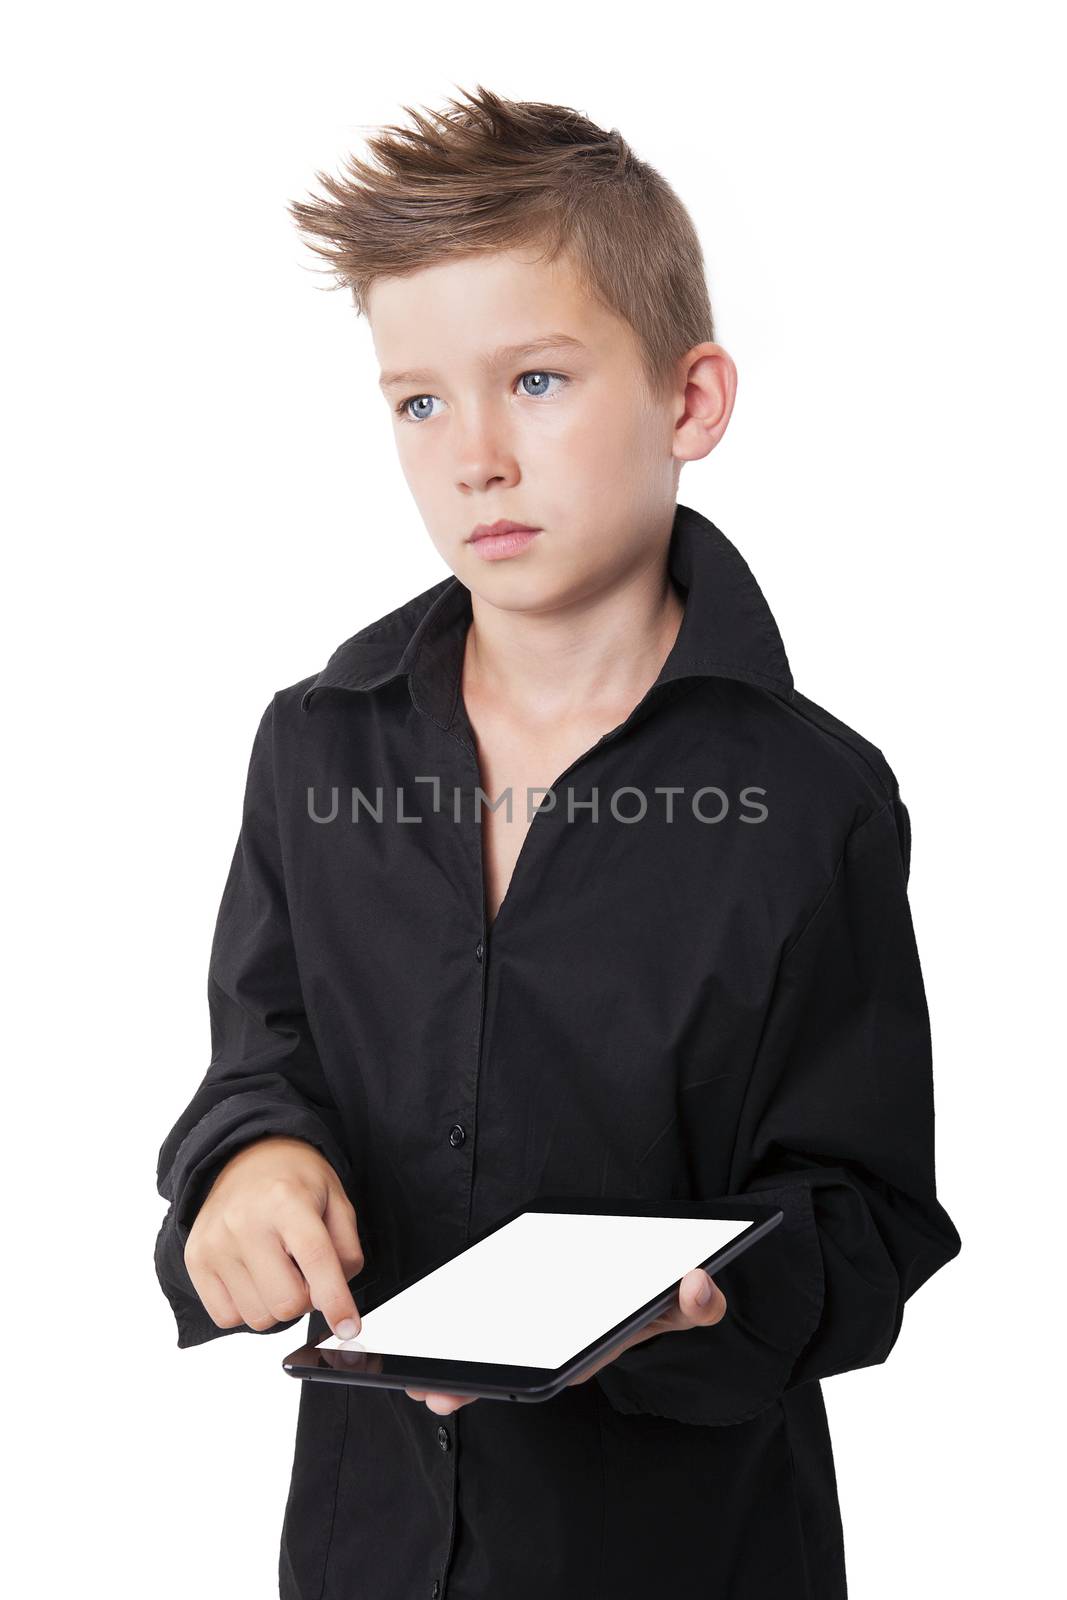 Charming boy holding and touching tablet screen with finger isolated on white background.